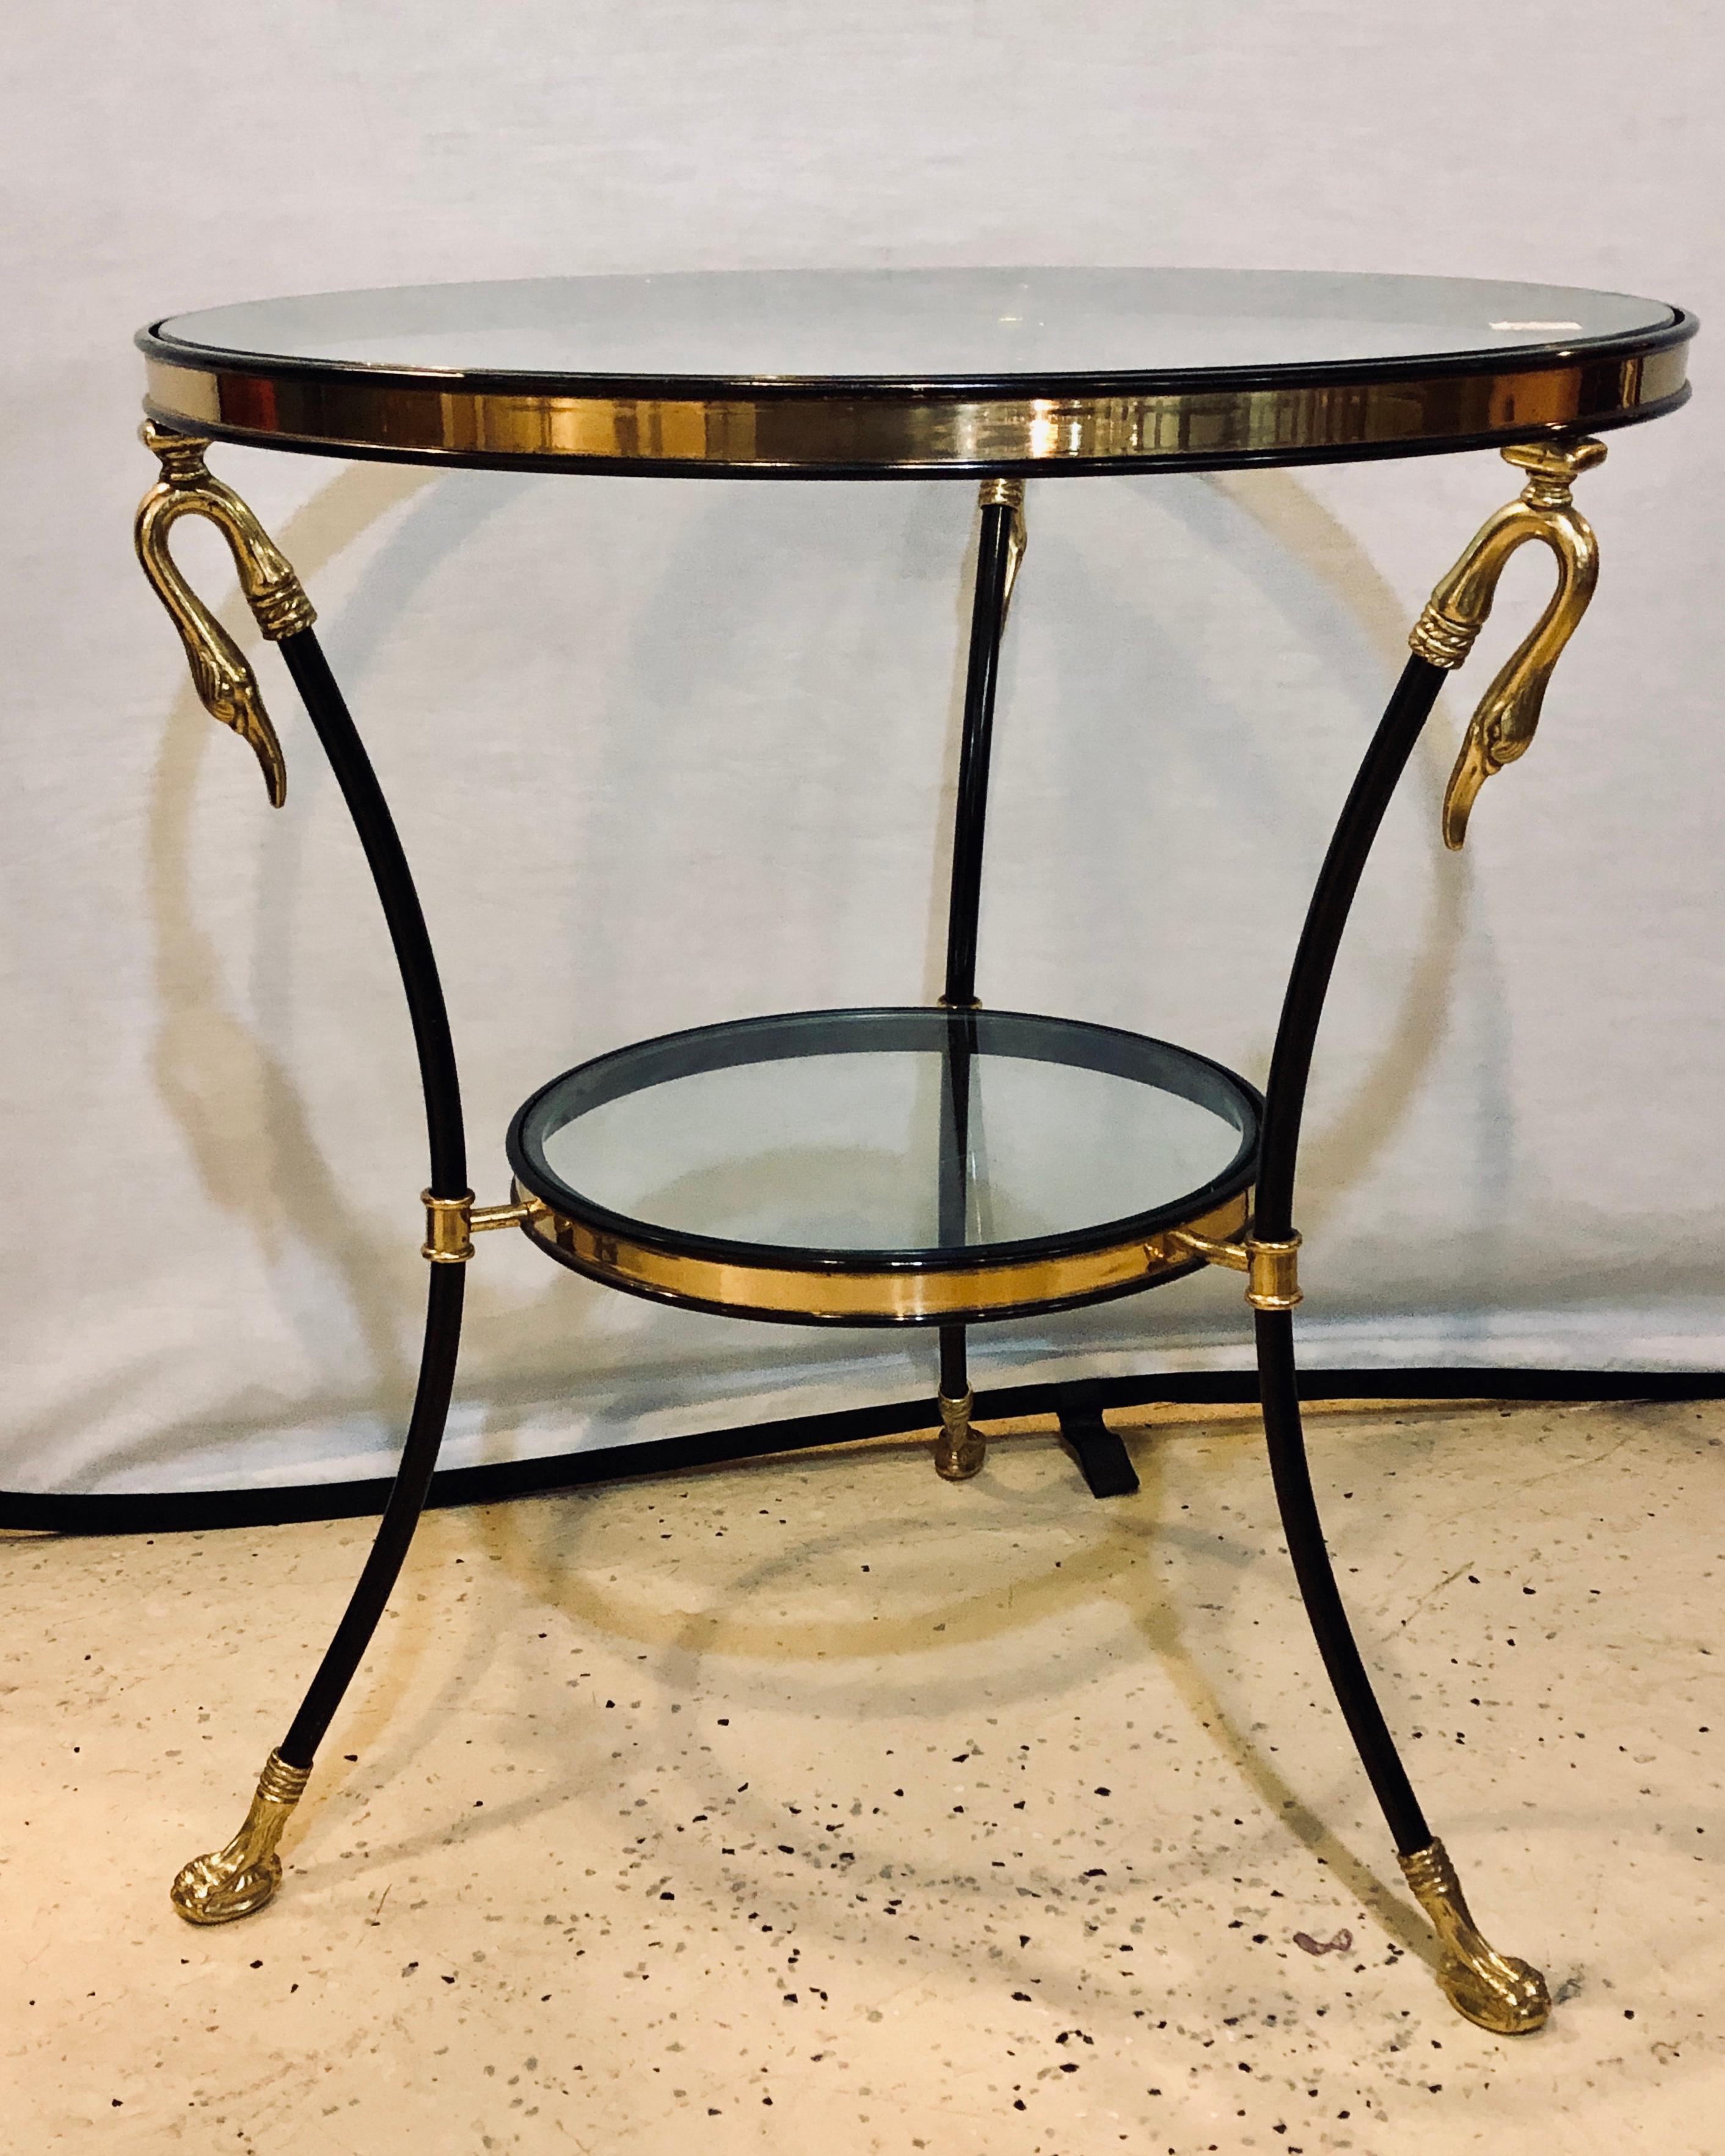 A fine custom quality neoclassical style brass and ebony steel bouilliotte / center or end table with swan heads. This Hollywood Regency end or bouilliotte table is seemingly timeless in fashion and design. The overall brass claw feet leading to